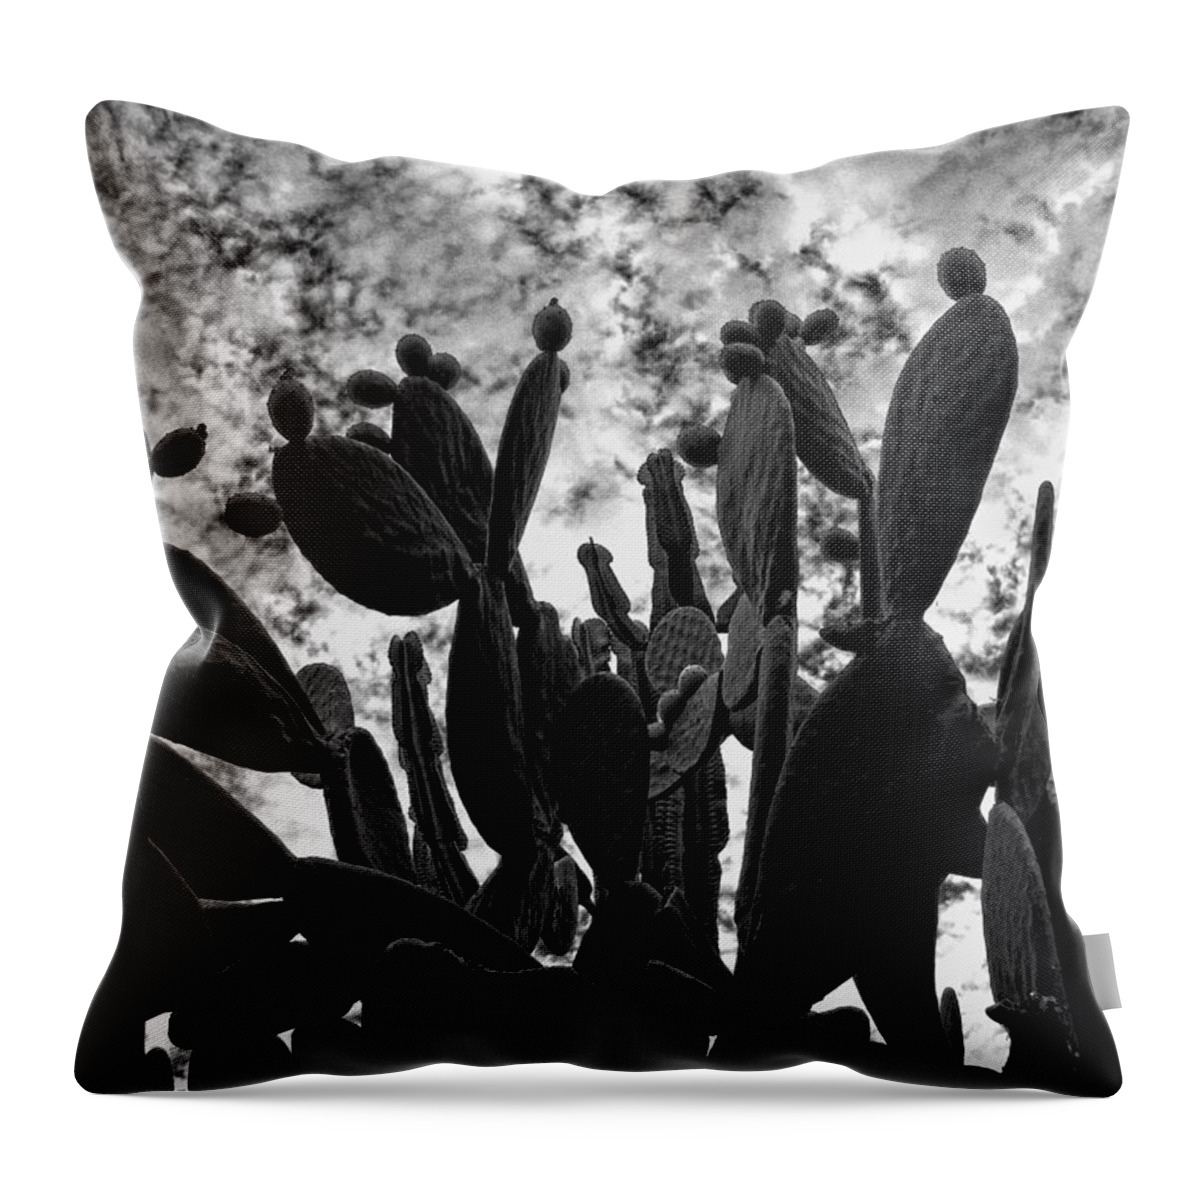 Black And White Throw Pillow featuring the photograph Nopalera by Guillermo Rodriguez